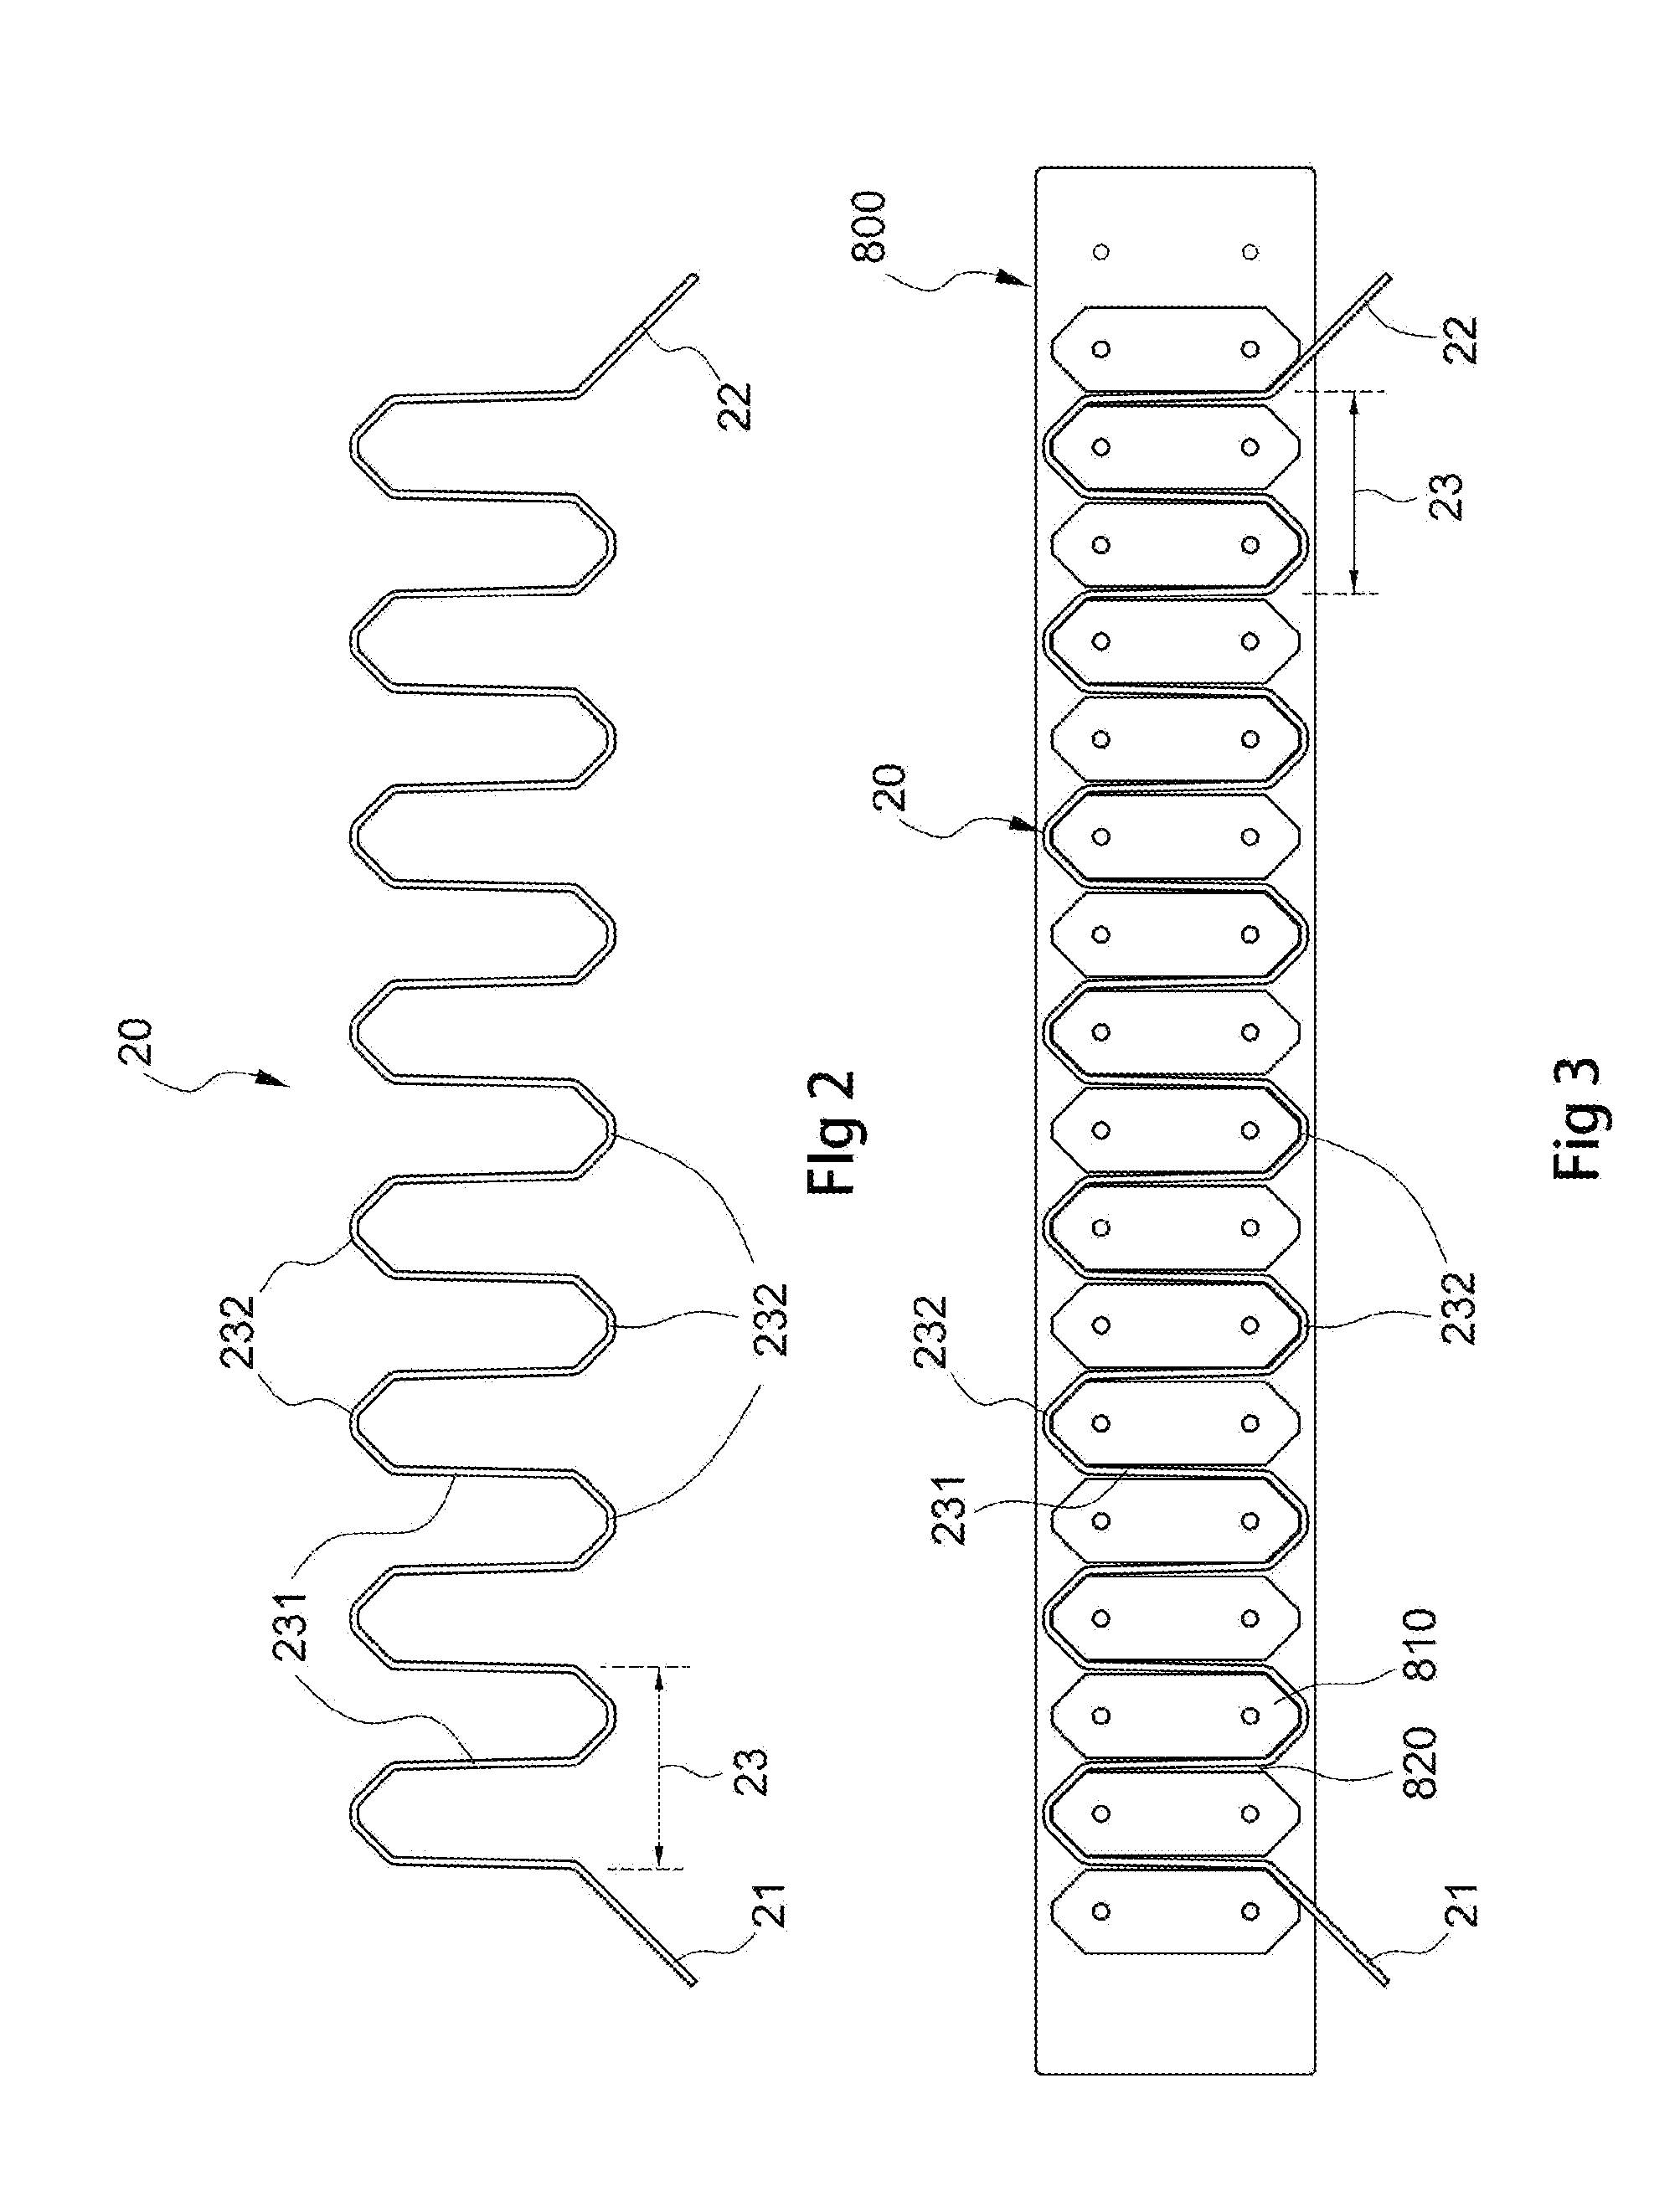 Method of Manufacturing Wound Stator for Alternating-Current Generator